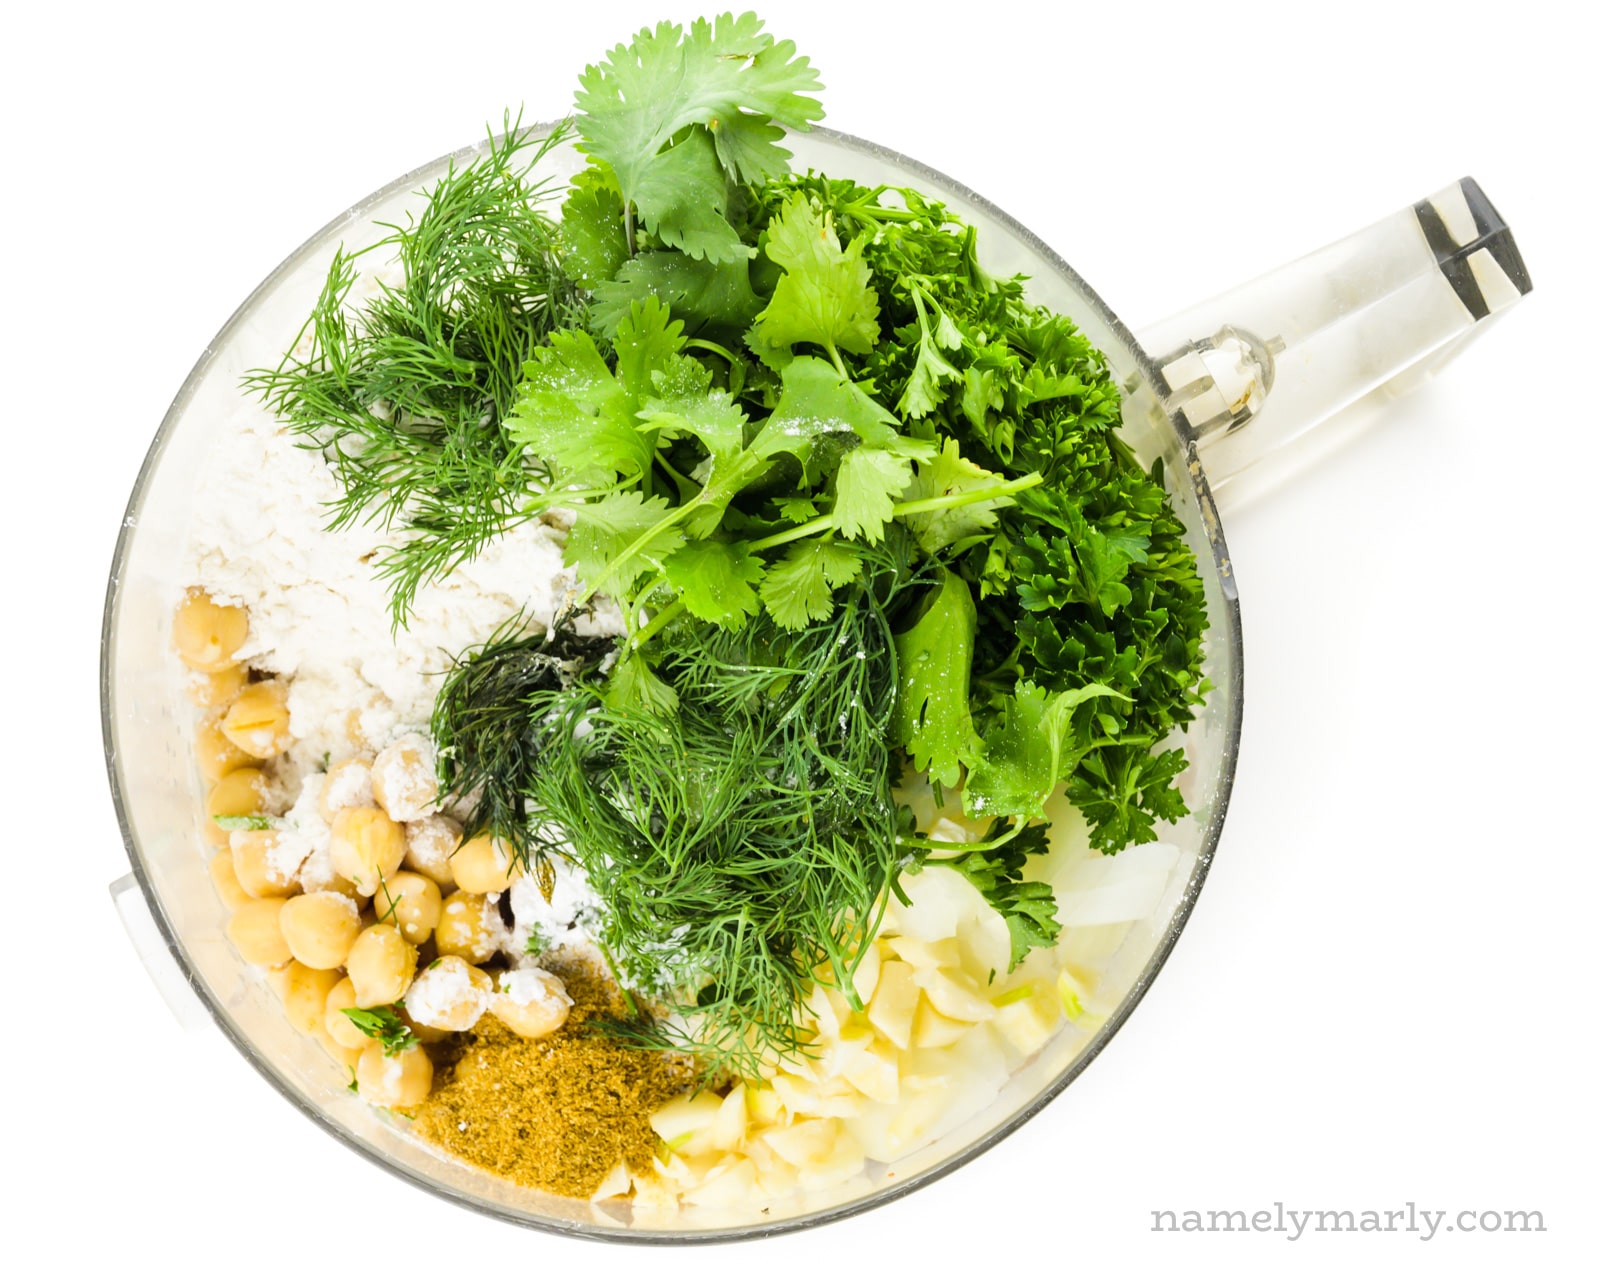 Looking down on a food processor bowl full of chickpeas, chopped onions, and fresh green herbs.